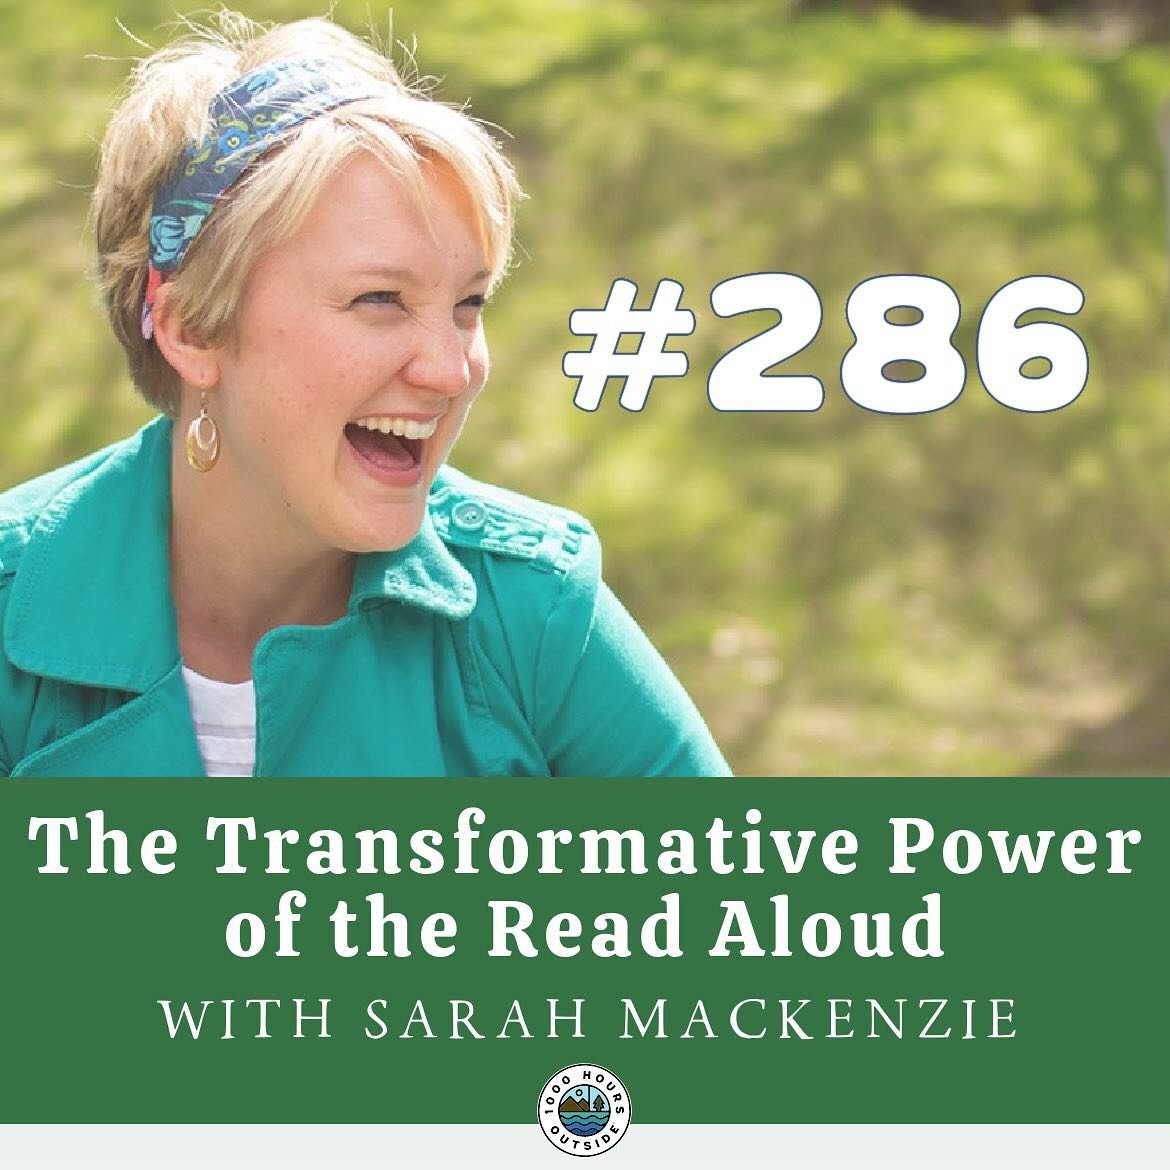 Comment &ldquo;read&rdquo; to listen and then share these amazing quotes ➡️ about reading aloud!

I can hardly believe I got a chance to talk with @readaloudrevival !!! Her book The Read-Aloud Family has been influential in our home for years and yea